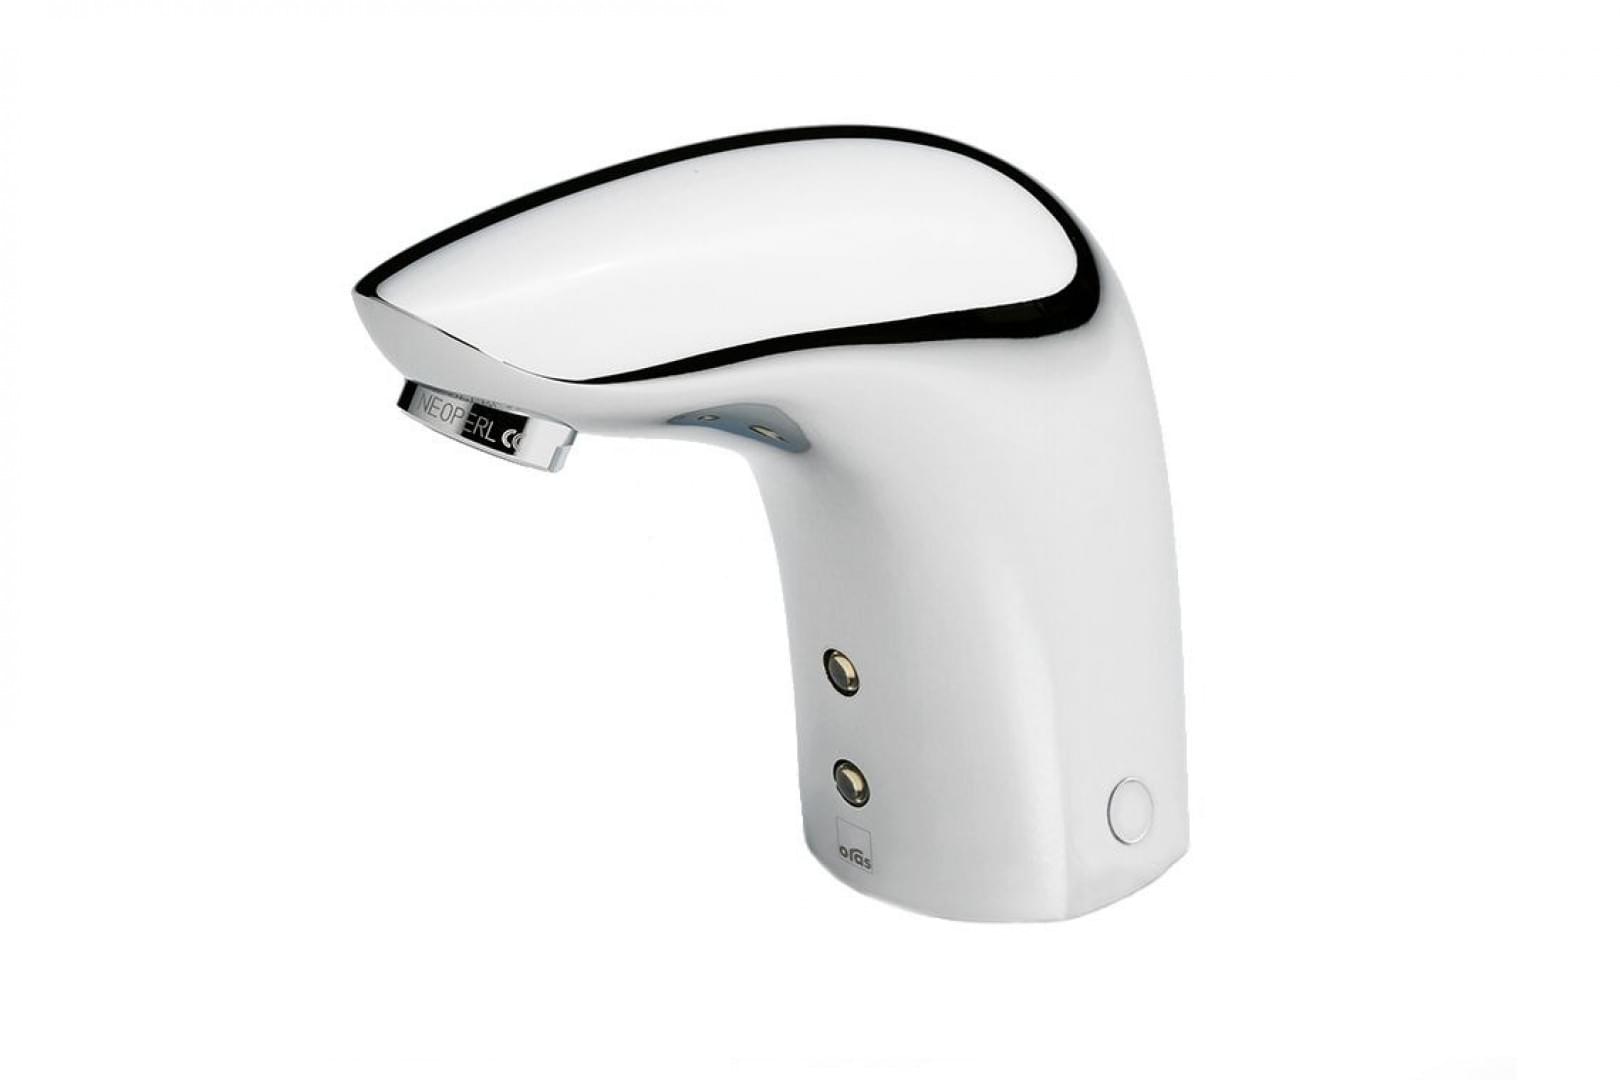 Enware-Oras Viva Series Sensor Activated Basin Tap with optional Temperature Adjuster - ENM6150 from Enware